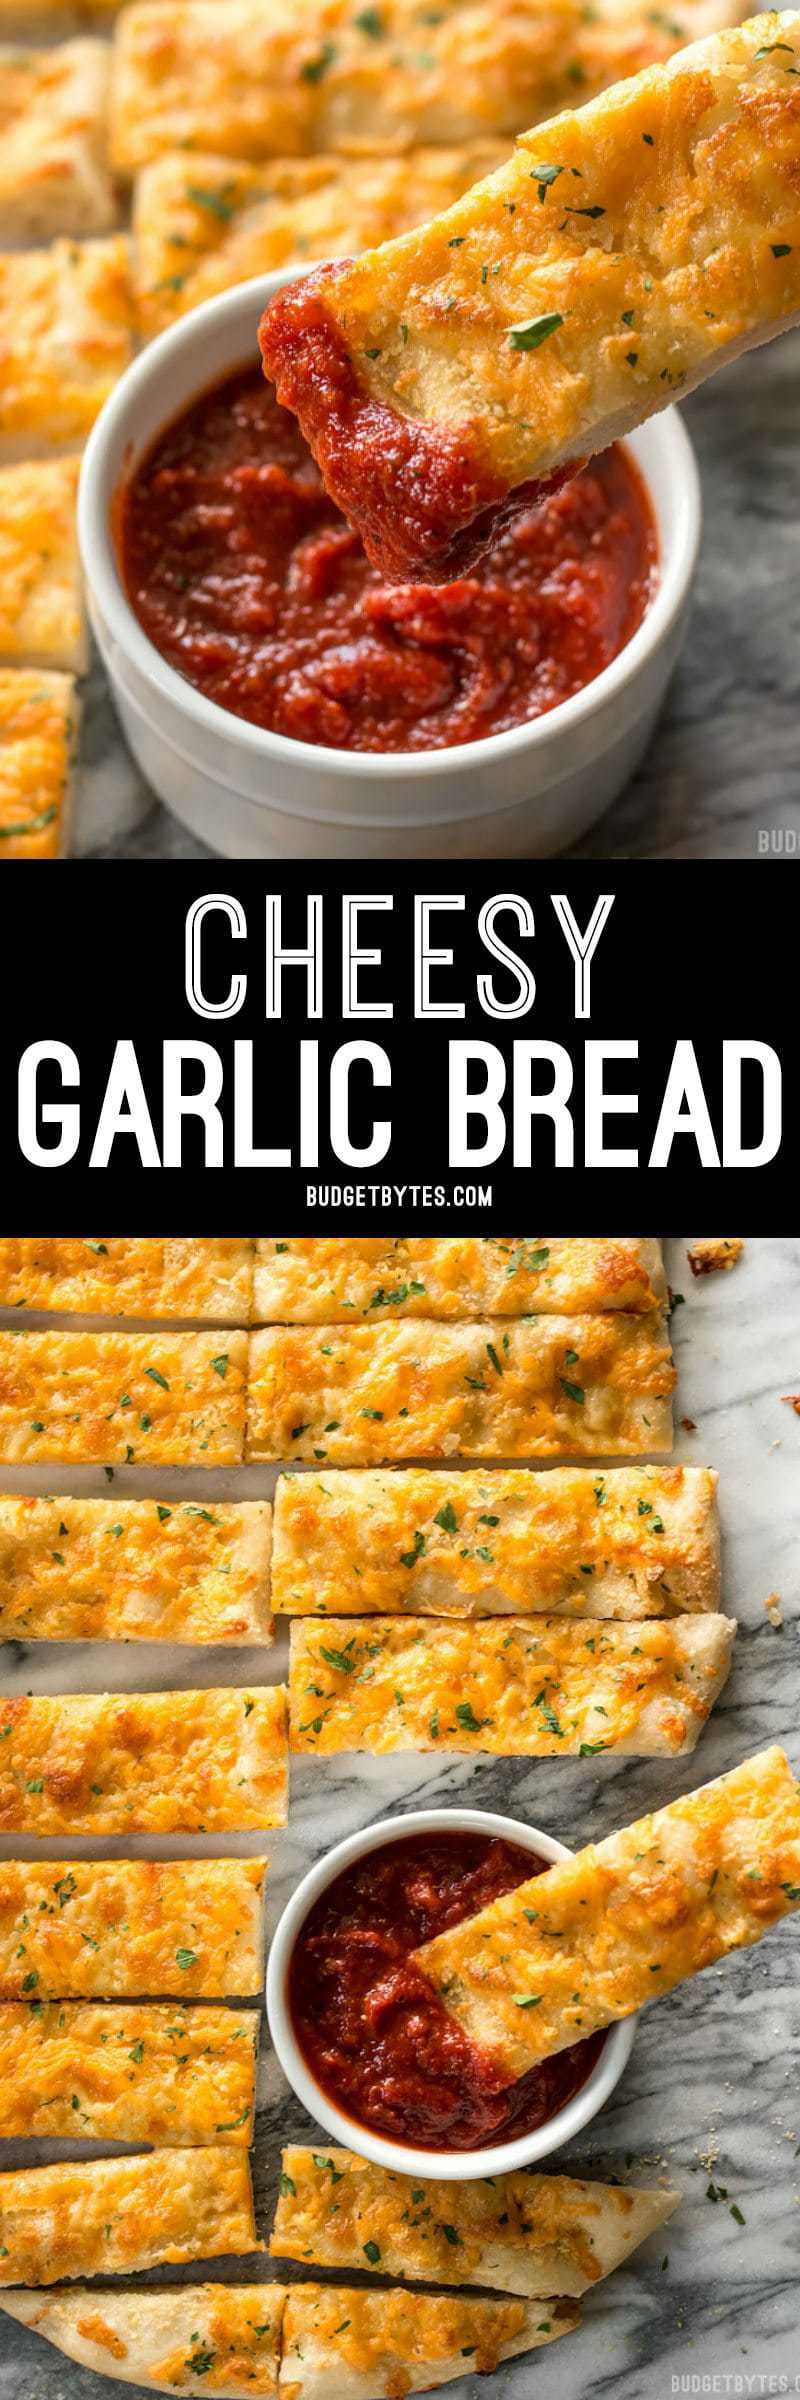 This Homemade Cheesy Garlic Bread is the real deal with homemade dough, fresh garlic, real butter, and your favorite cheese. BudgetBytes.com